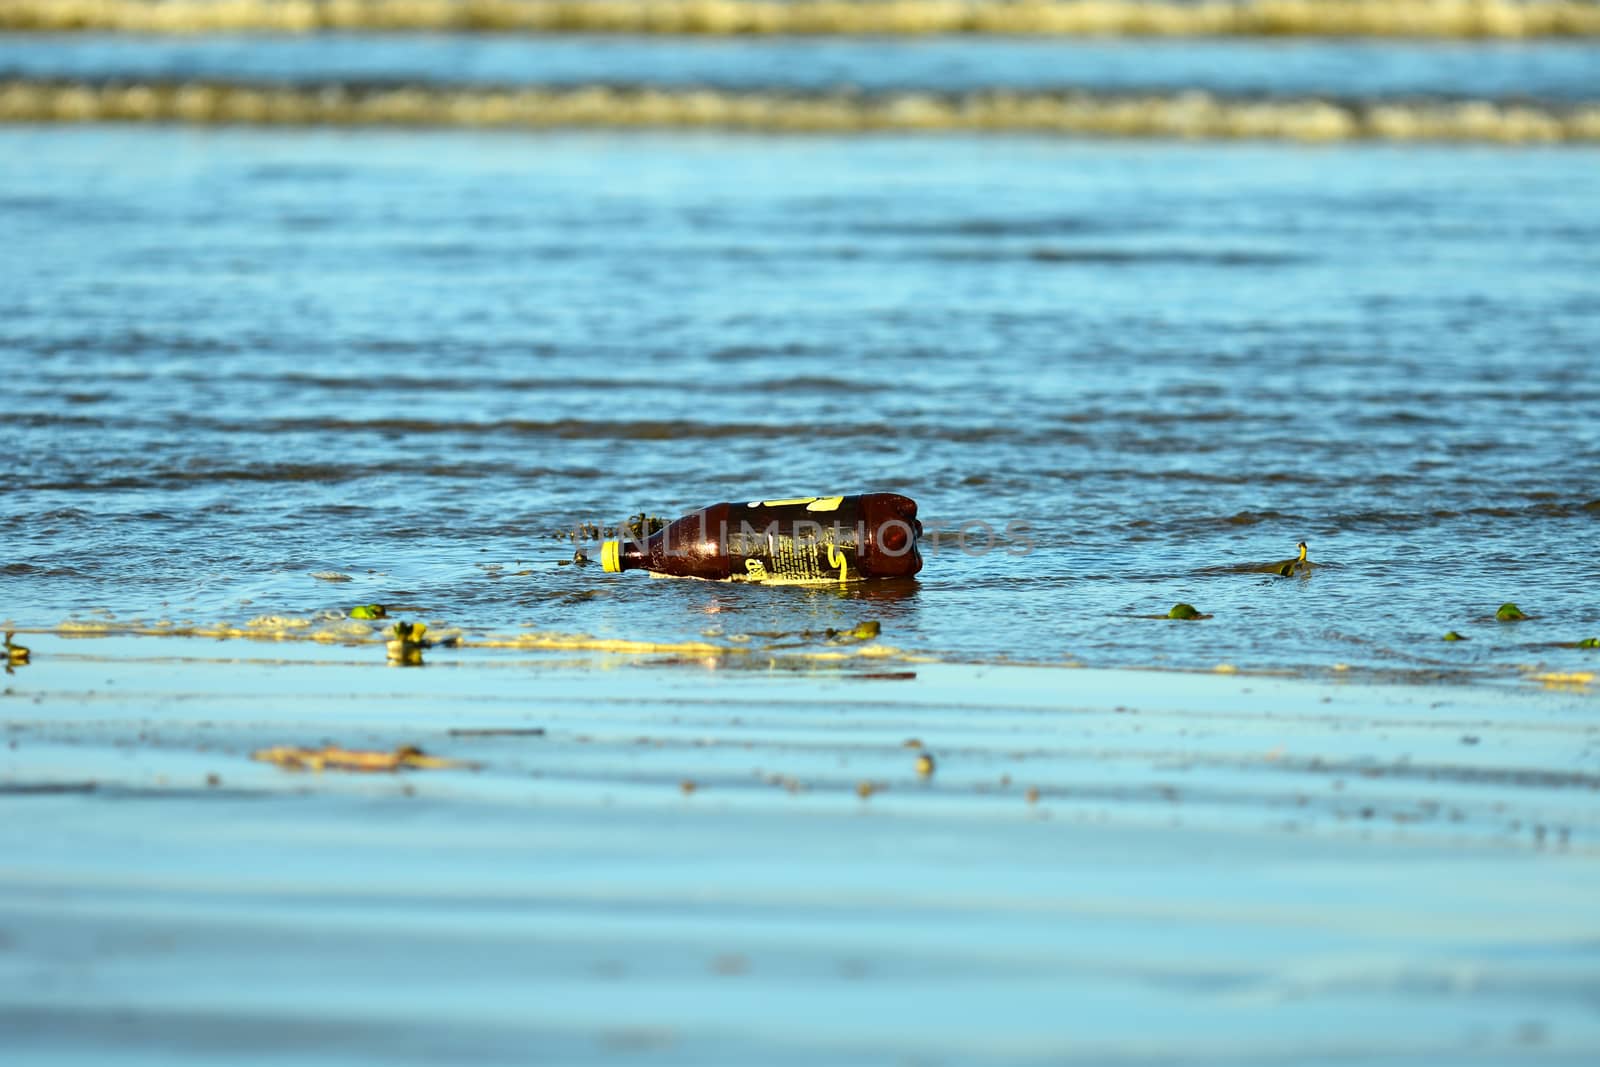 Auckland, New Zealand - Jan 2020. Sea pollution, with a plastic bottle washed ashore on a beach. by Marshalkina